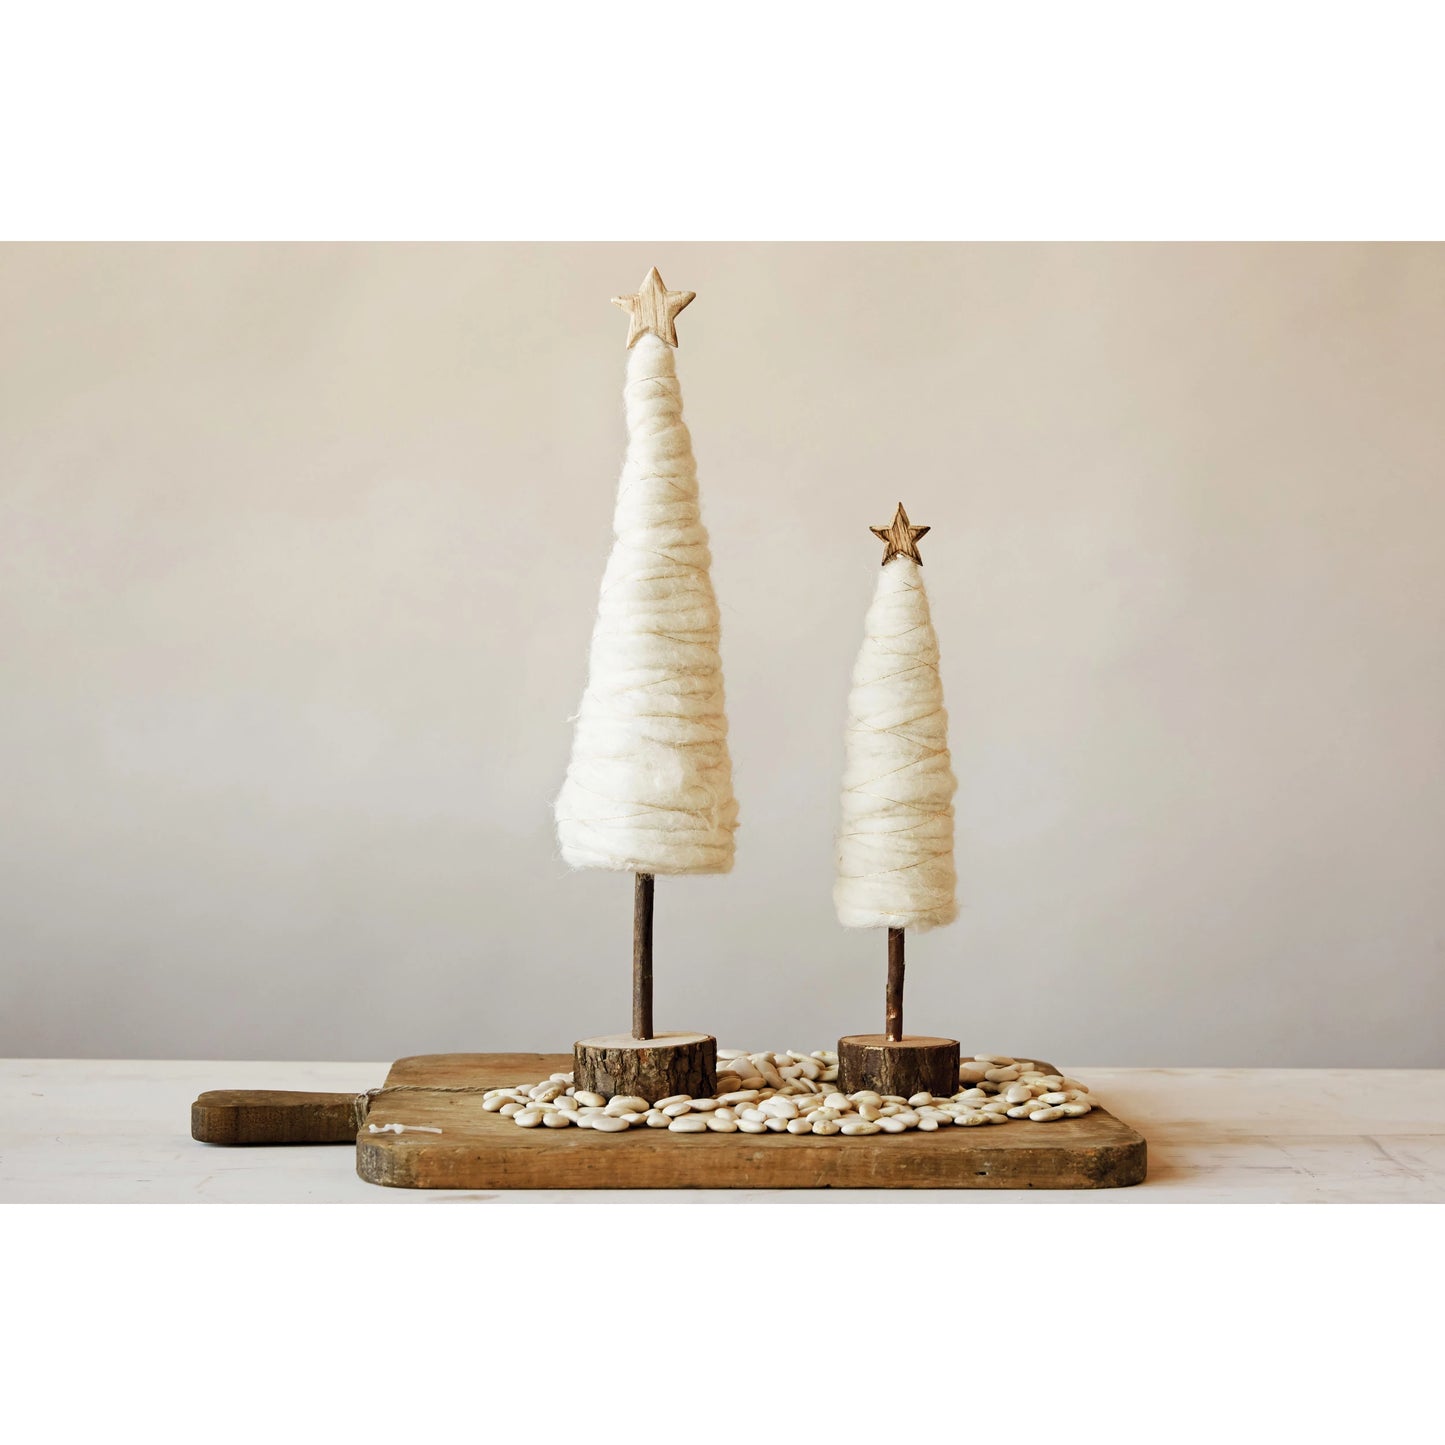 Wool Christmas Tree with Star - Large